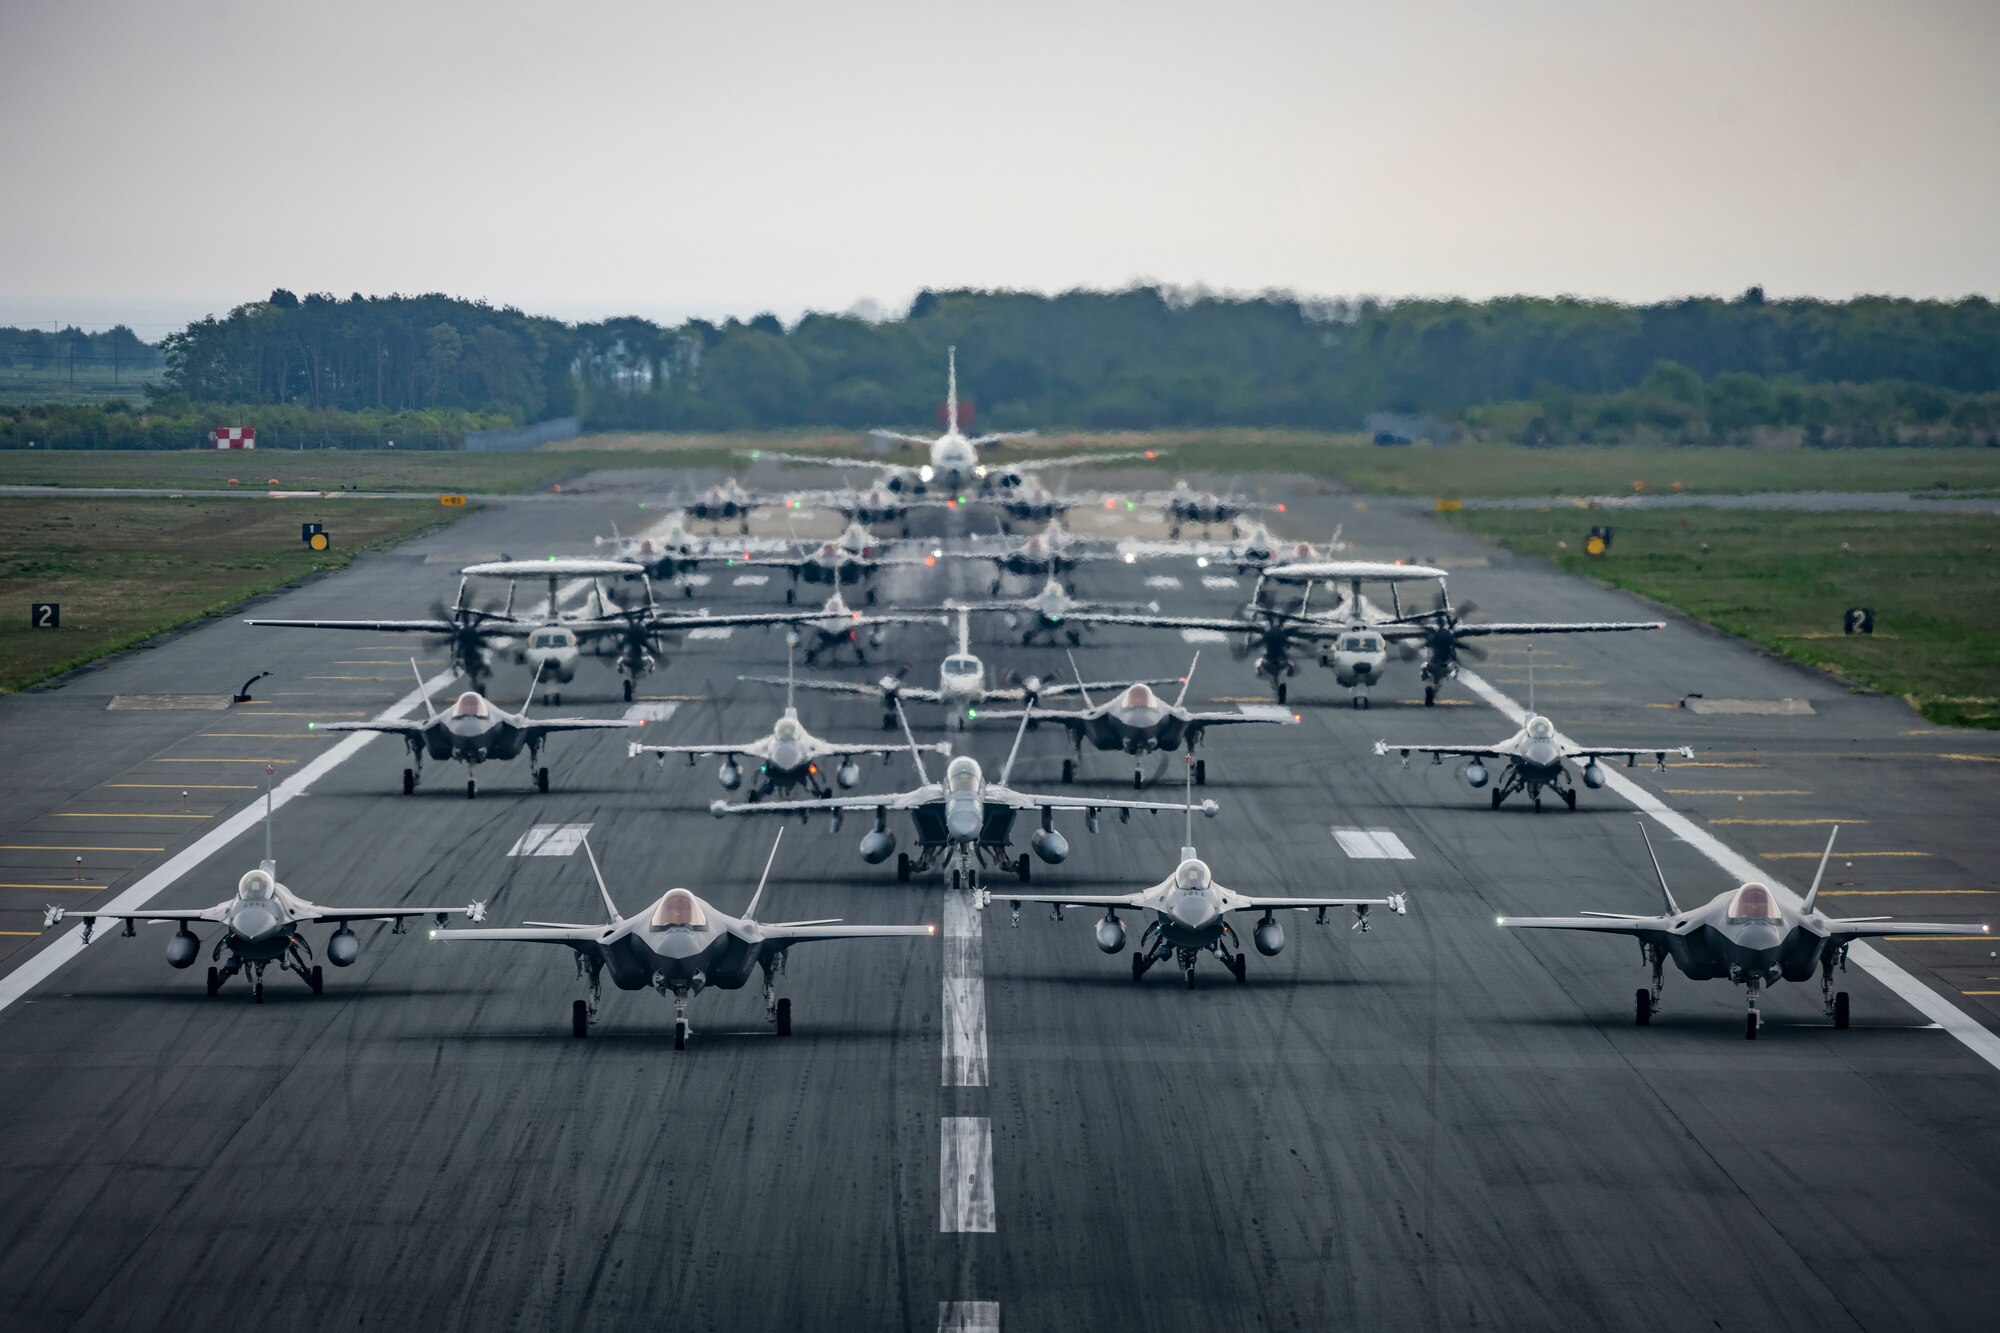 Sixteen U.S. Air Force F-16CM Fighting Falcons, 12 Japan Air Self-Defense Force F-35A Lightning II Joint Strike Fighters, two JASDF E-2C Hawkeyes, one JASDF CH-47 Chinook, one U.S. Navy EA-18G Growler, one USN C-12 Huron, and one USN P-8 Poseidon perform a base capabilities demonstration to culminate a week-long readiness exercise at Misawa Air Base, Japan,  May 13, 2022. The large formation was part of a routine exercise scenario that tested the 35th Fighter Wing's ability to generate airpower in support of the defense of Japan and other partner nations, ensuring the stability and security of a free and open Indo-Pacific region. (U.S. Air Force photo by Airman 1st Class Leon Redfern)